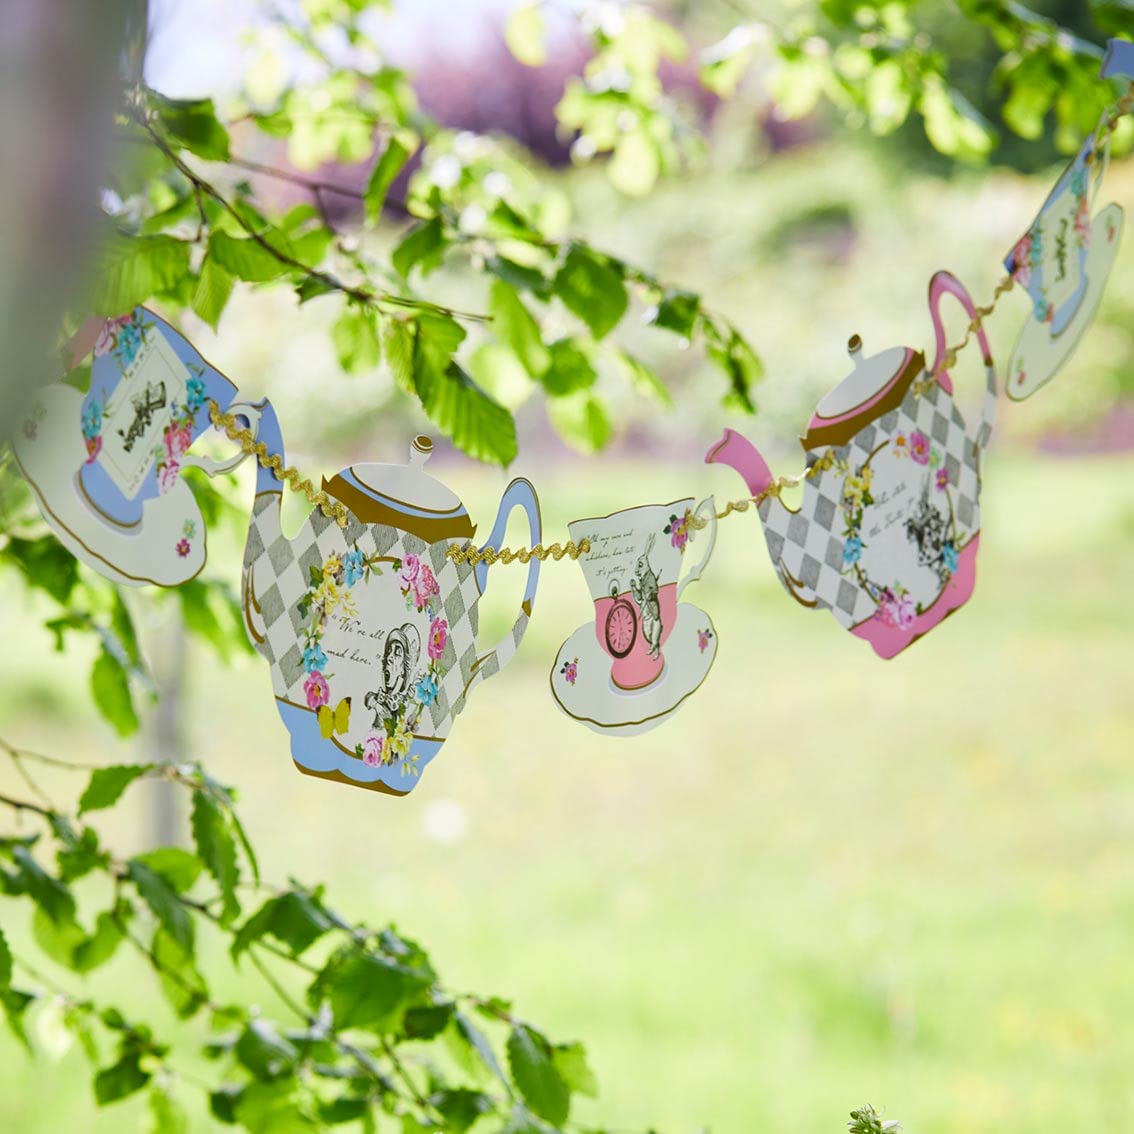 Alice in Wonderland Supplies   Teapot Banner Bunting Decorations   For Mad Hatter Tea, Birthday Party, Baby Shower, Garden   Paper, Length 4m